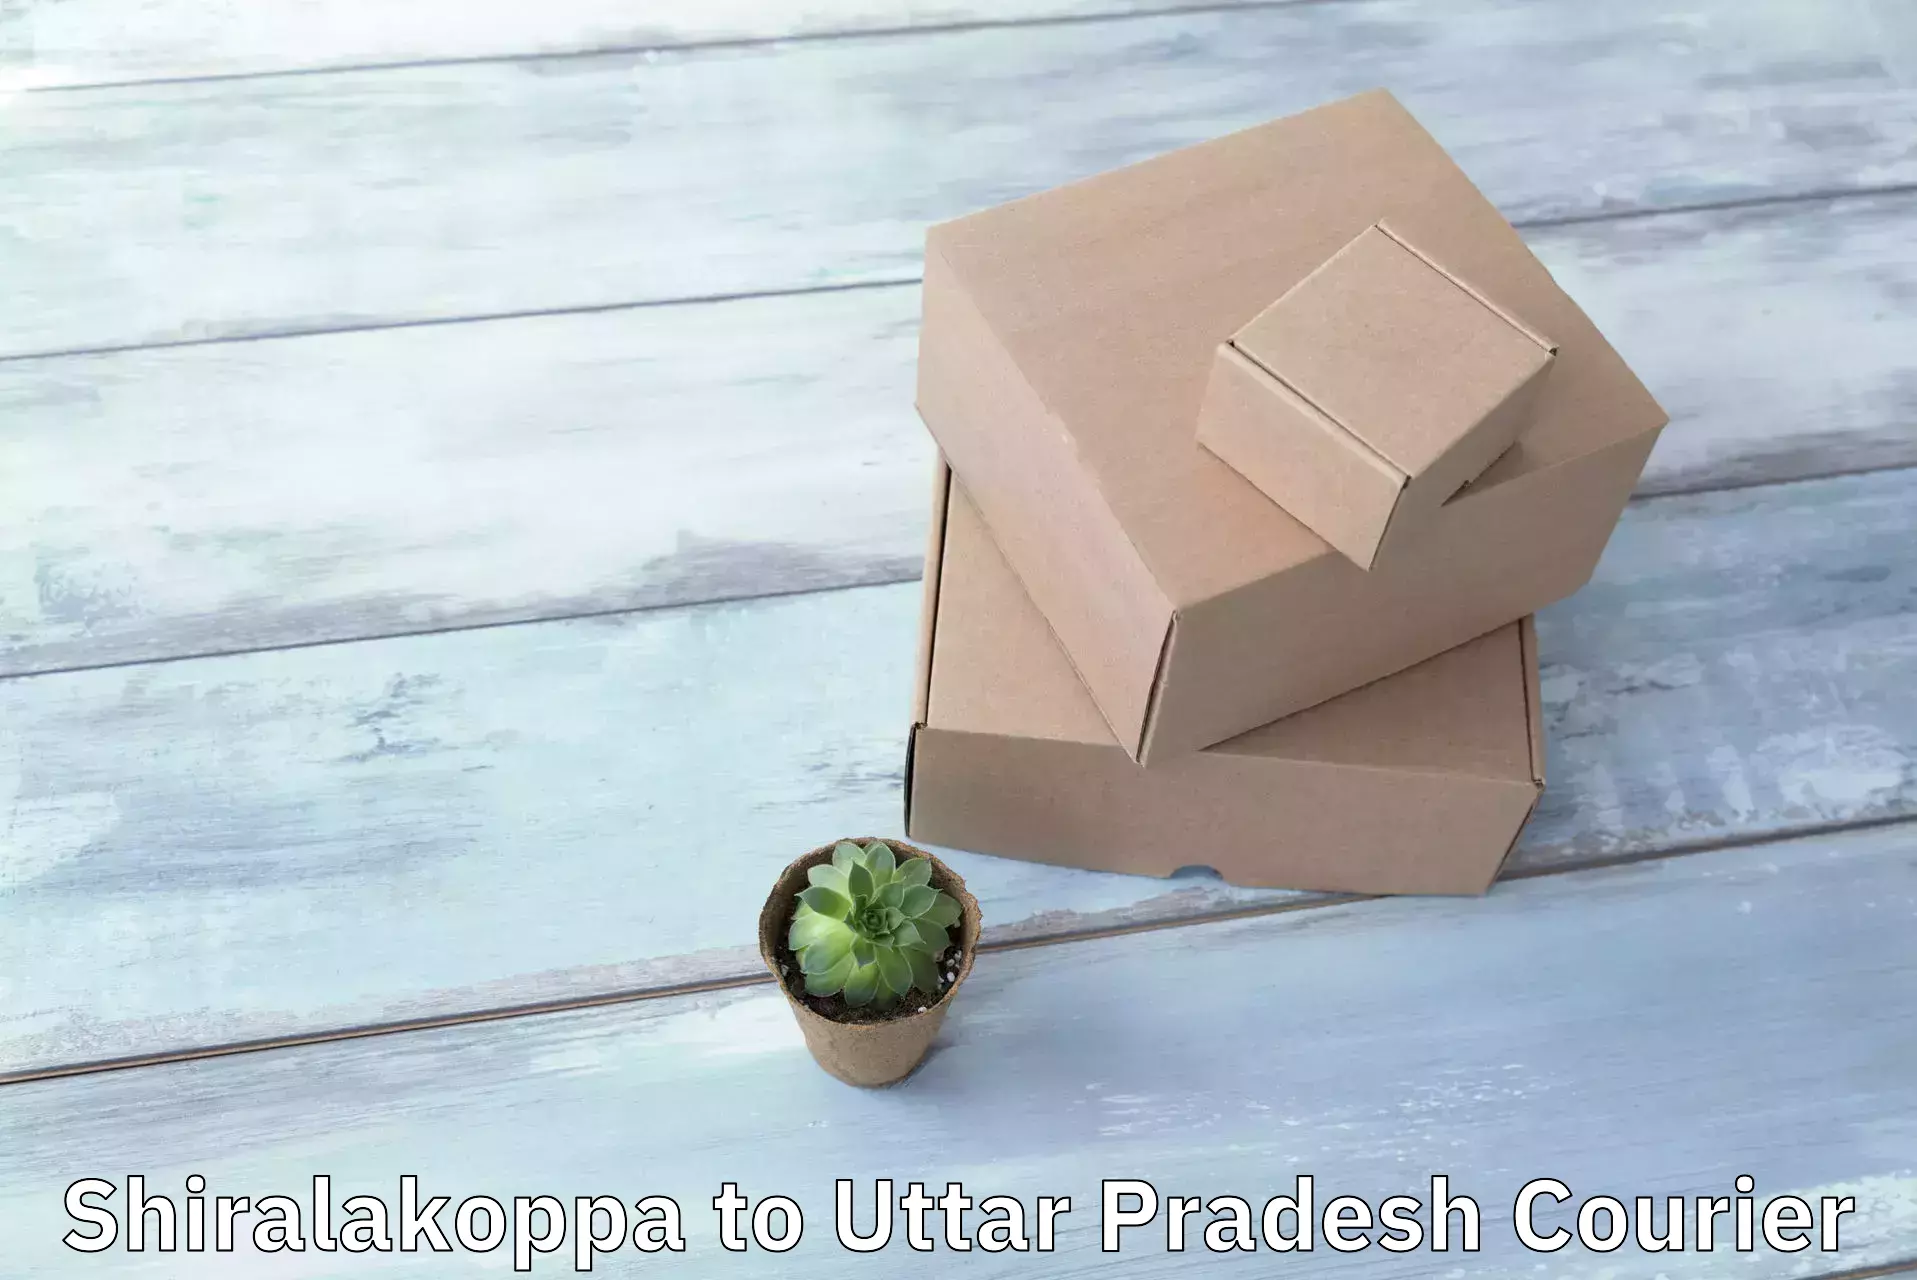 Overnight delivery services Shiralakoppa to Hathras